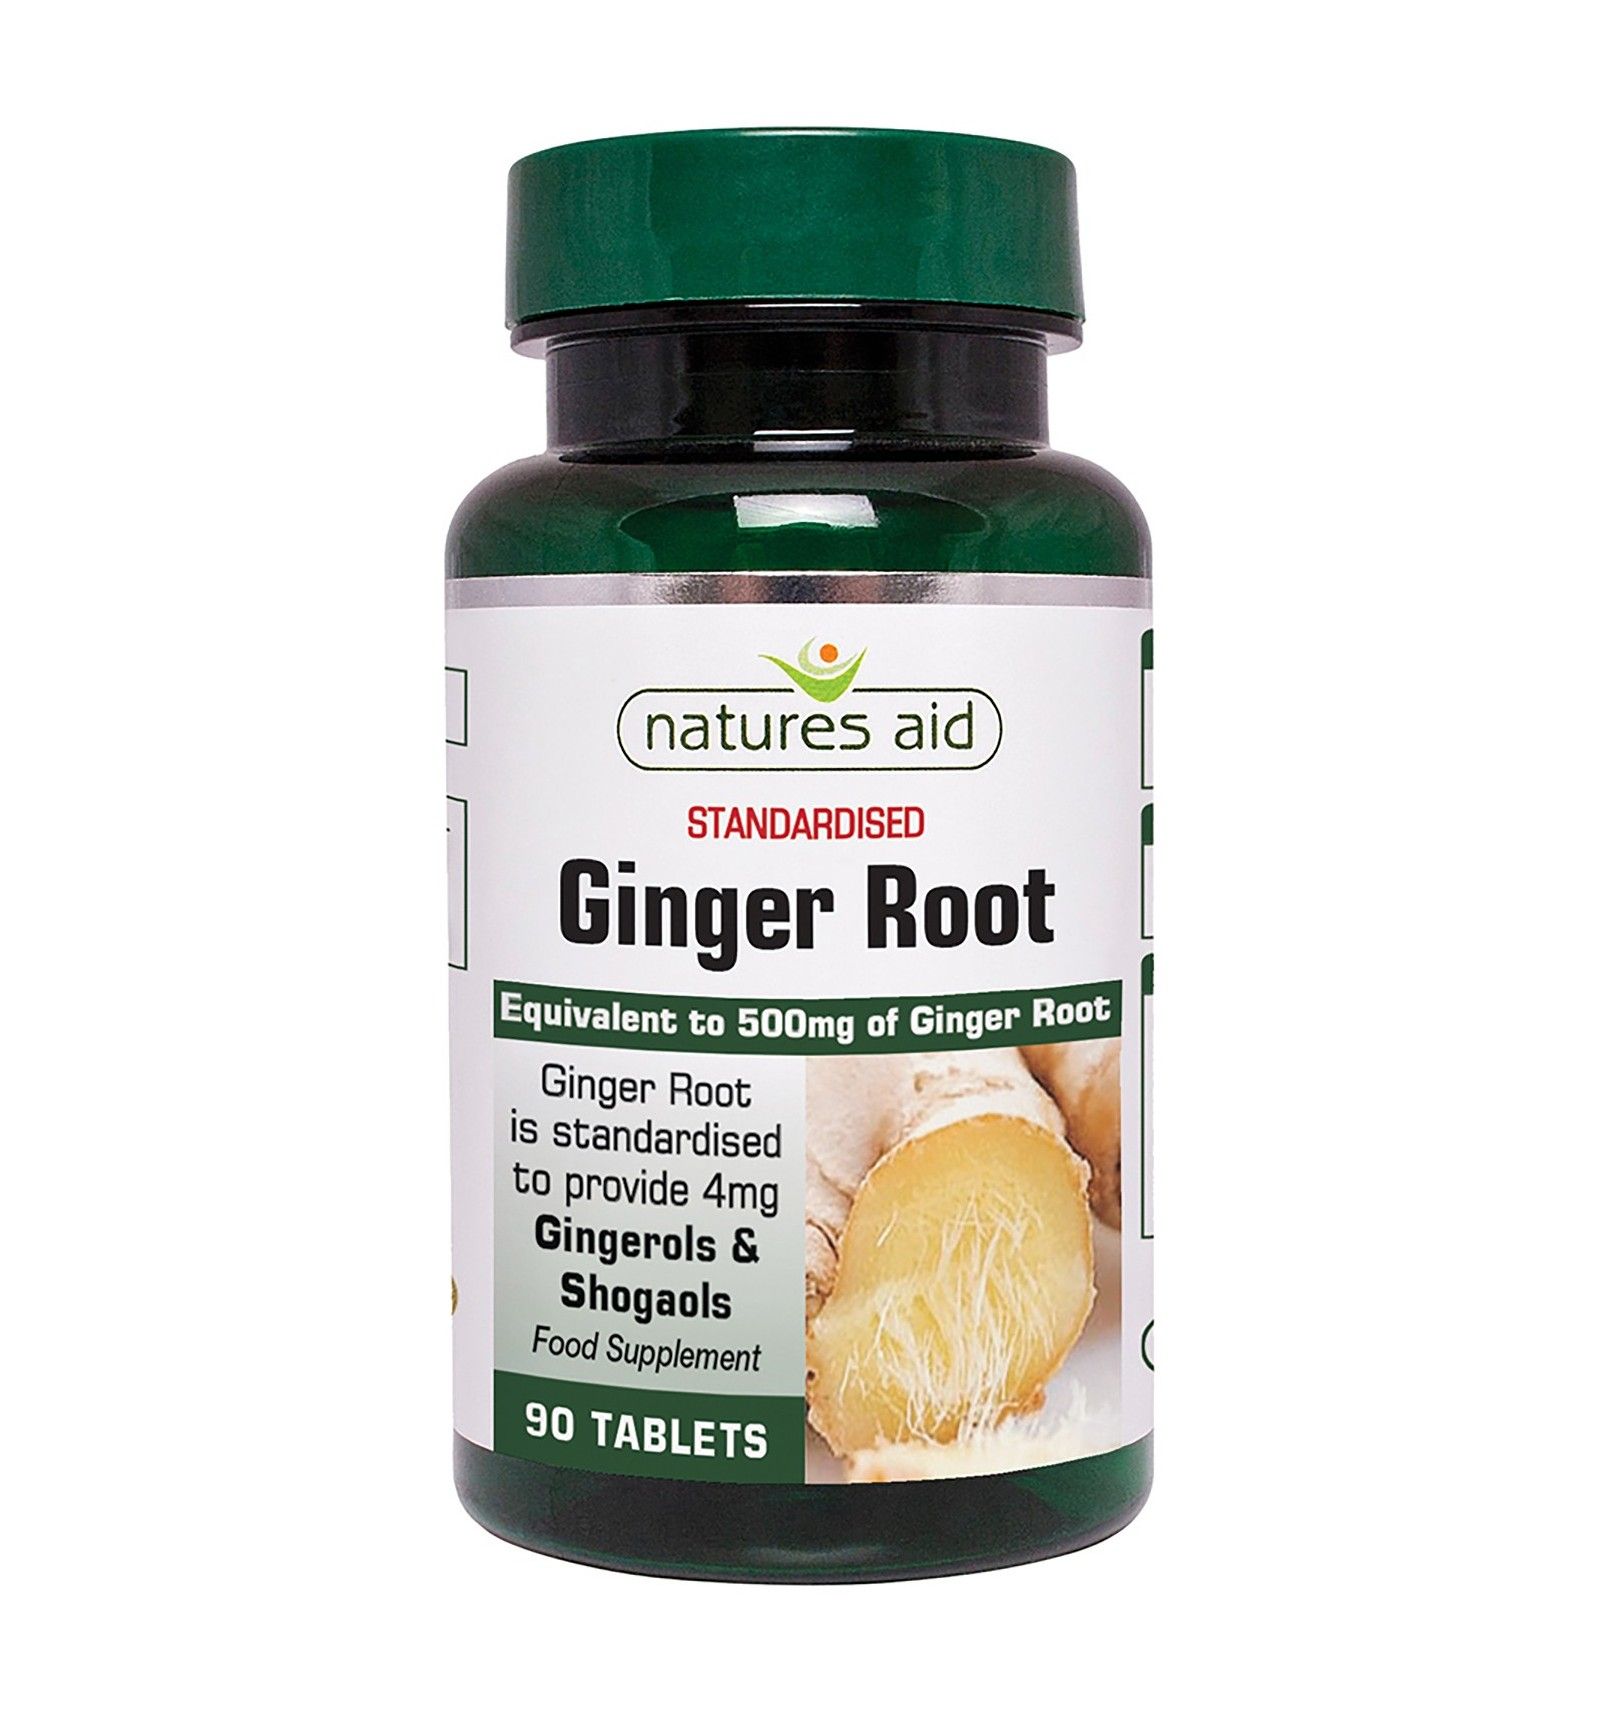 Natures Aid Ginger Root 500mg - 90 Tablets